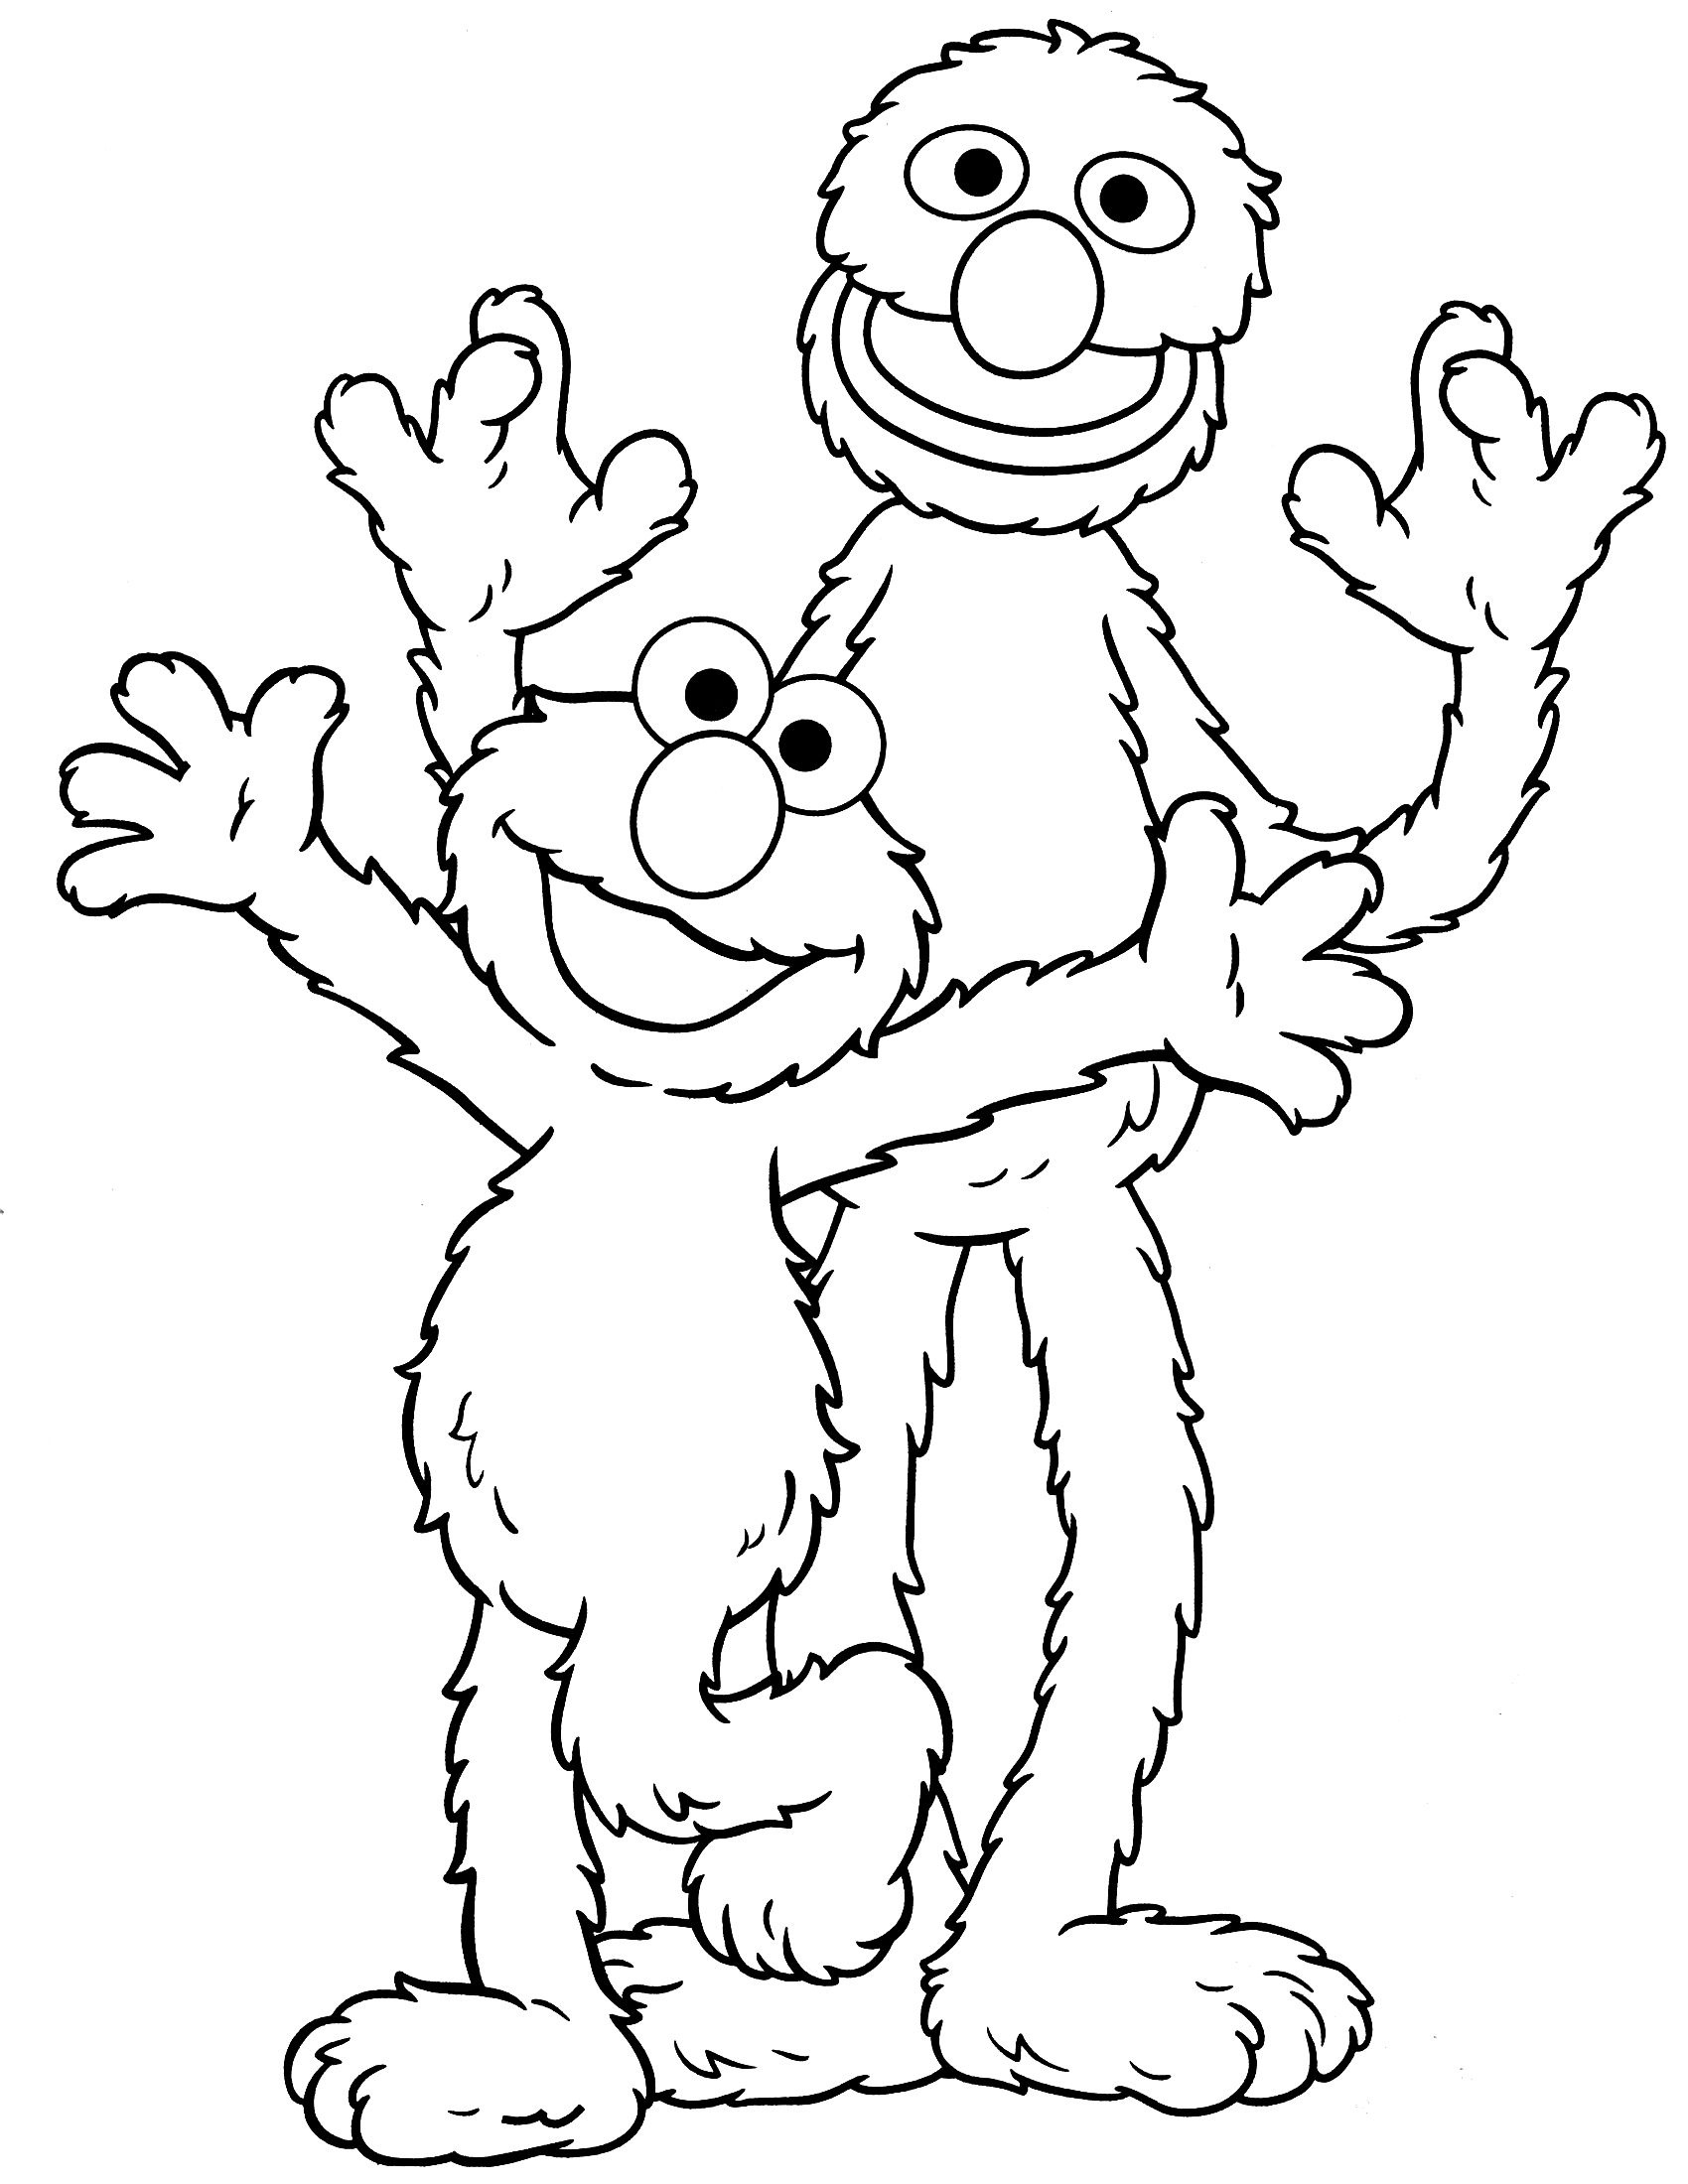 Sesame Street Coloring Pages Bert Free Printable Coloring Pages - Free Printable Sesame Street Coloring Pages